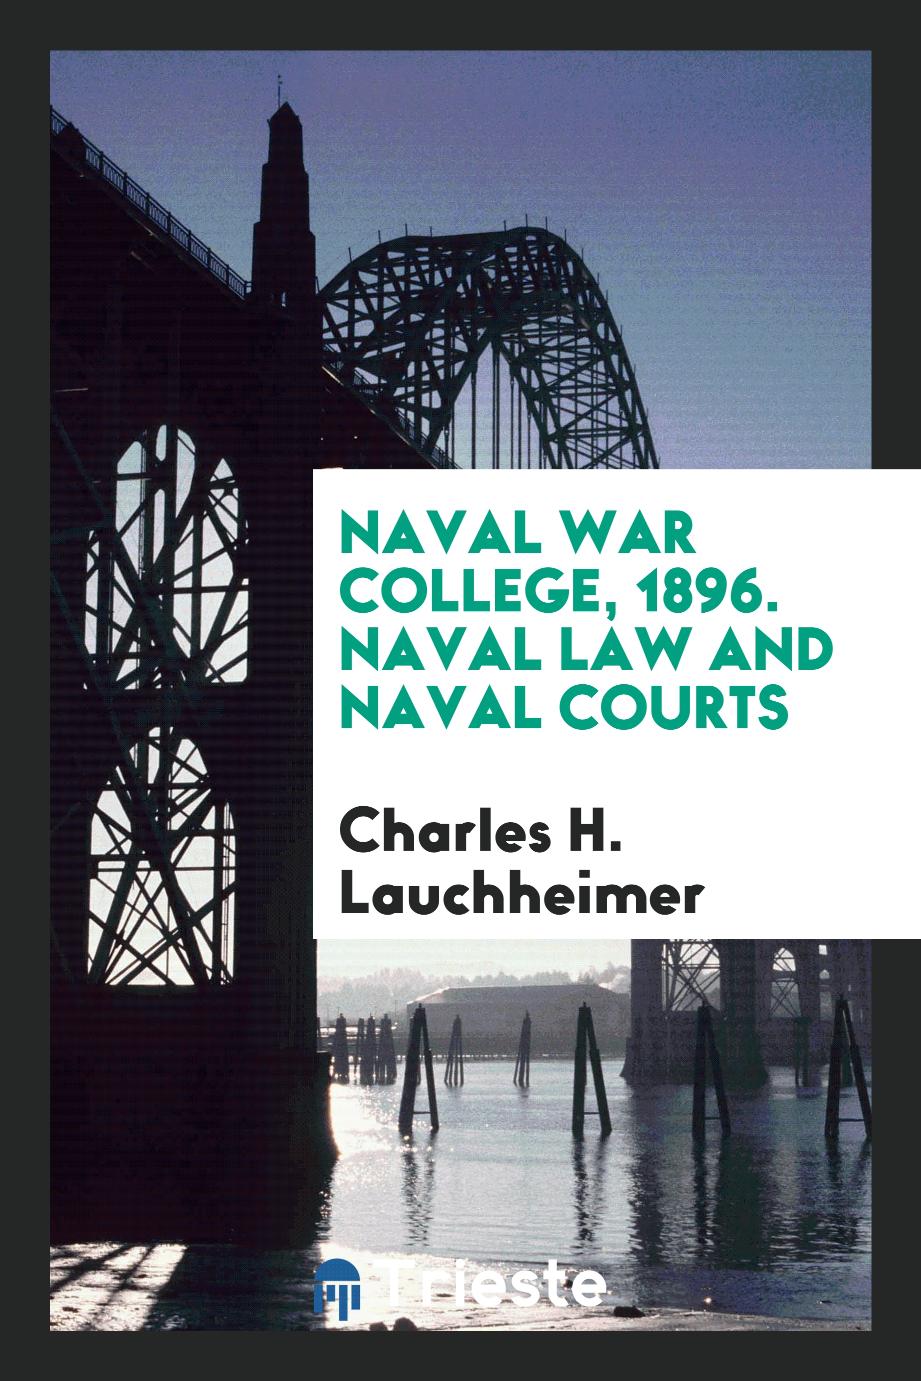 Naval War College, 1896. Naval Law and Naval Courts